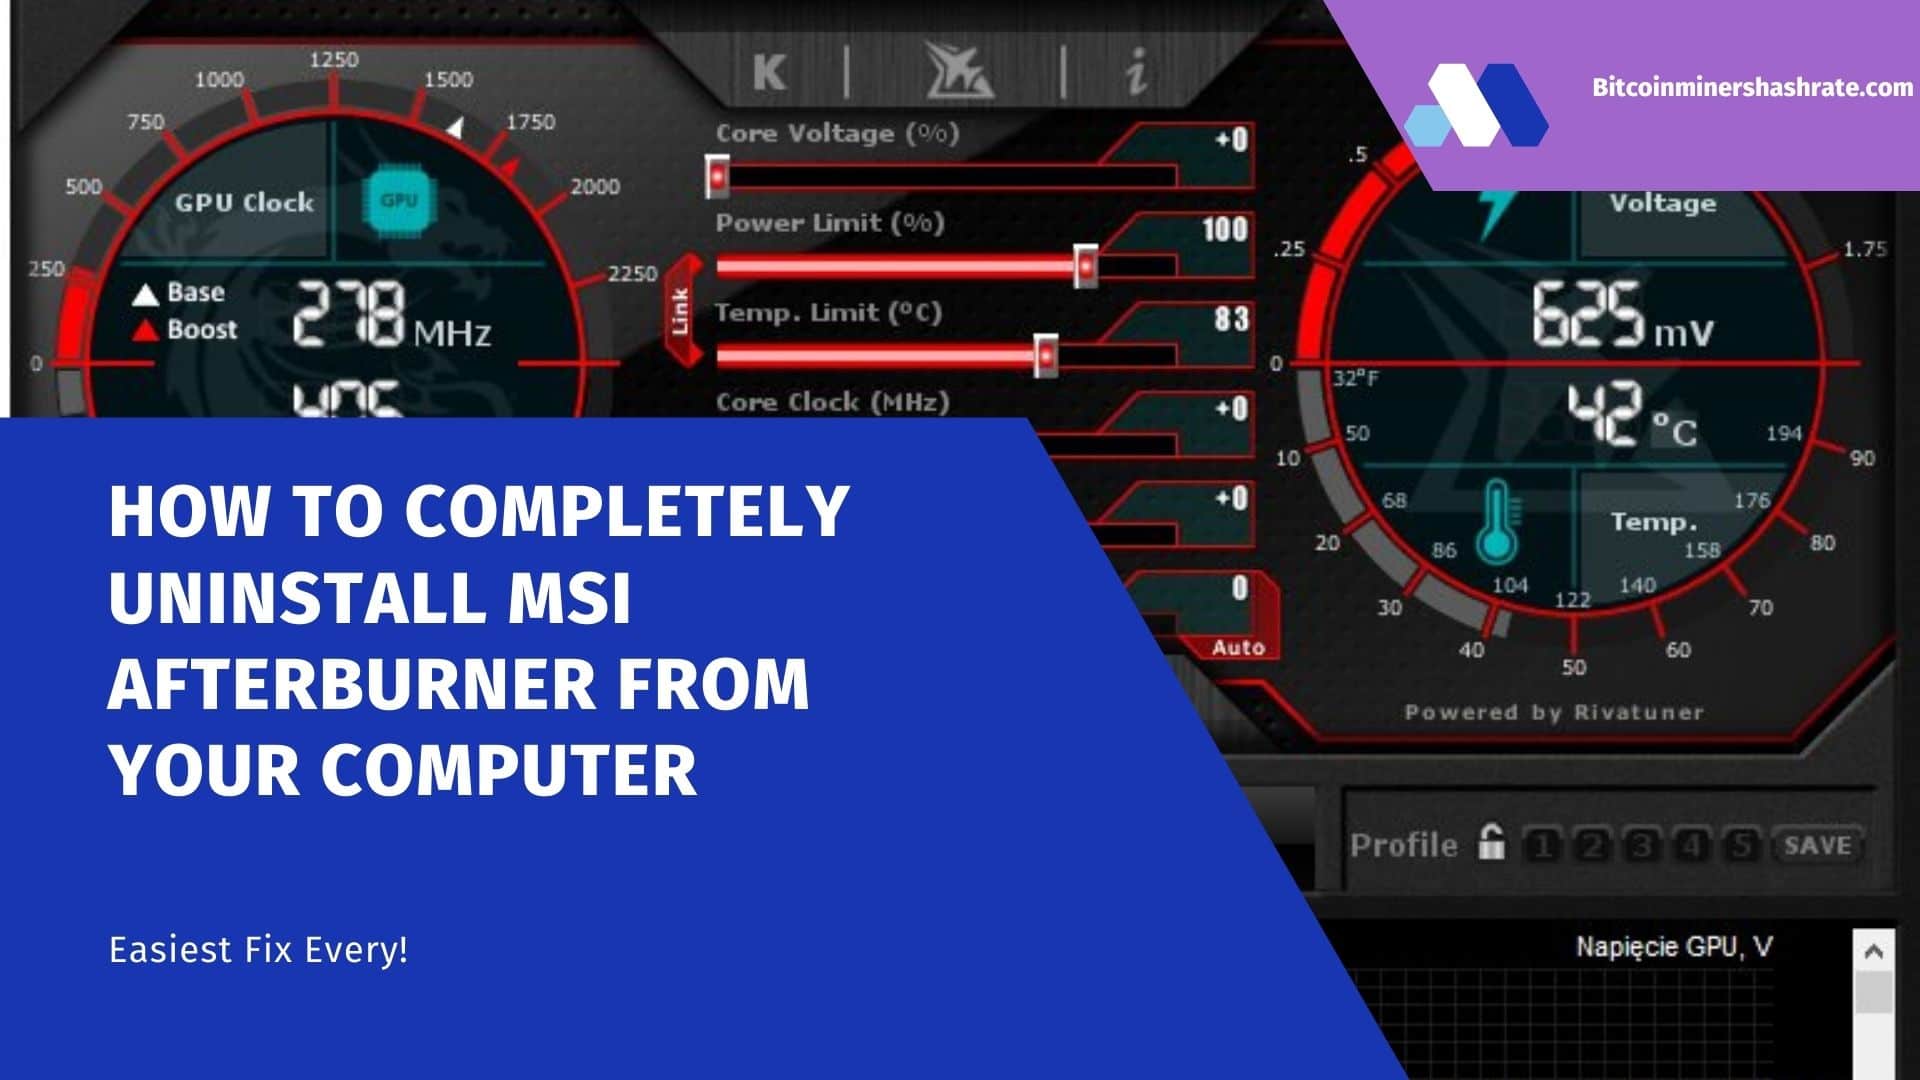 How to completely uninstall Msi Afterburner from your computer